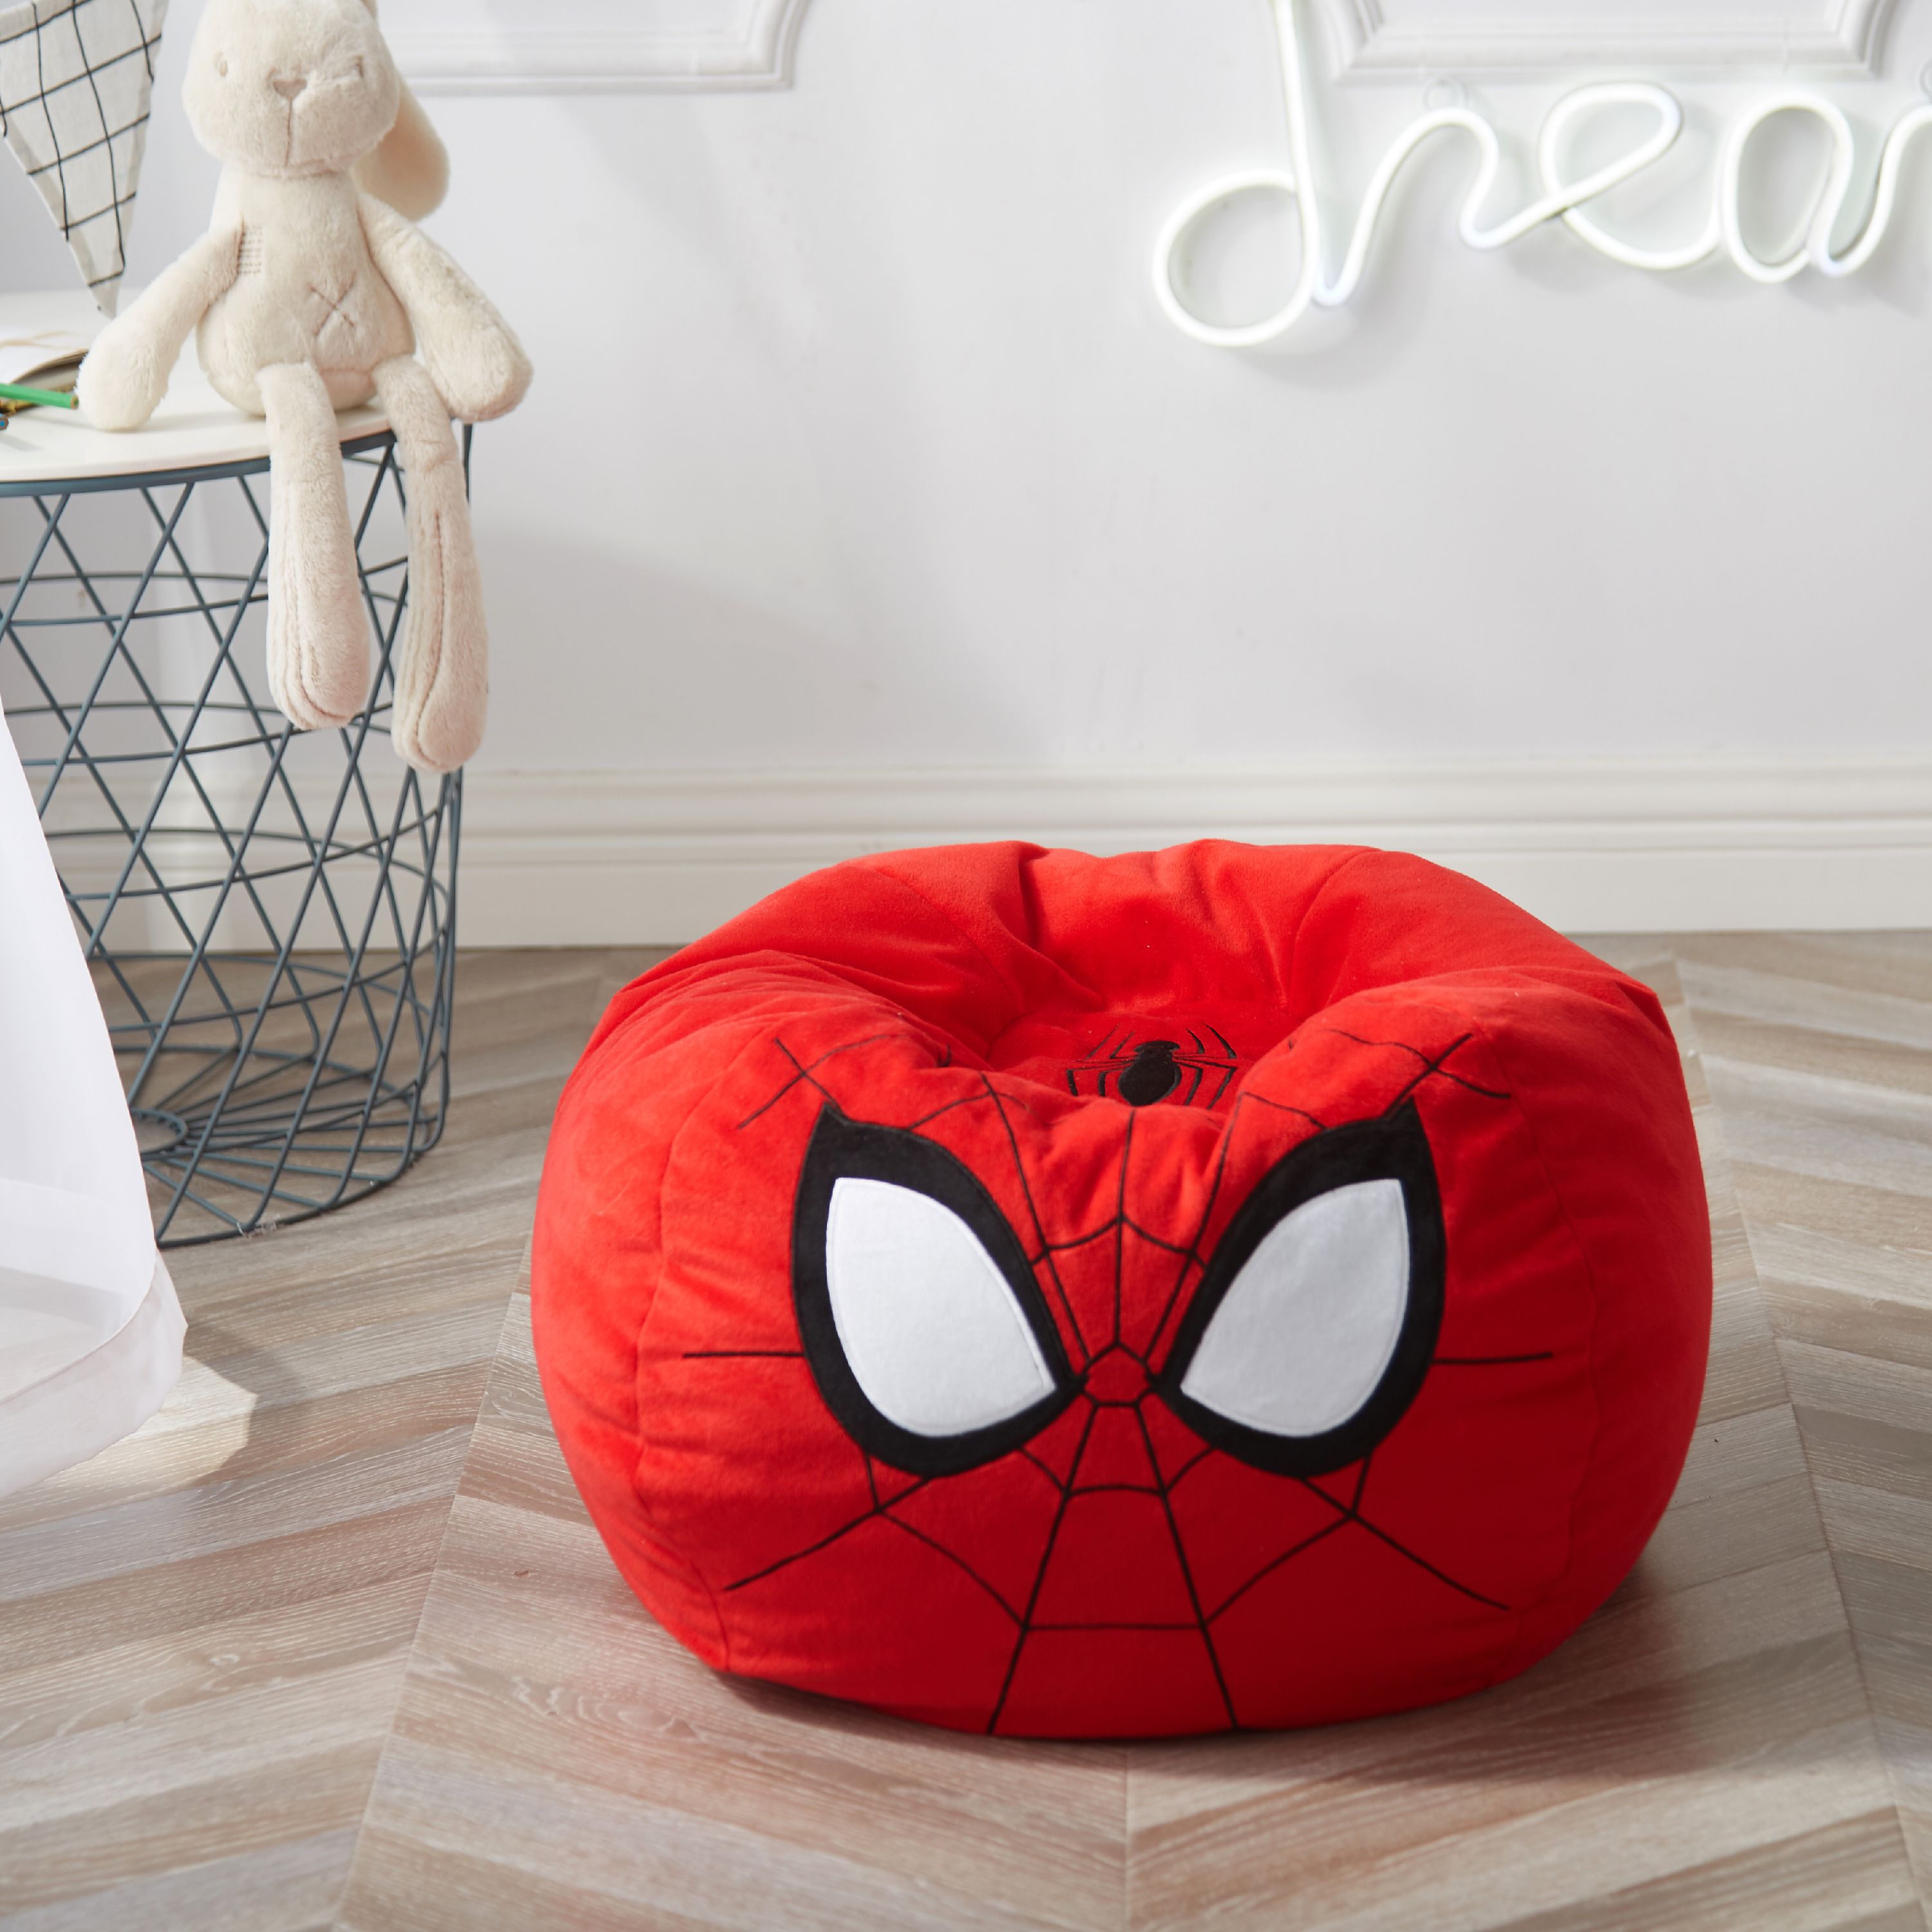 Marvel Spider-Man Bean Bag Chair, Red - image 1 of 3